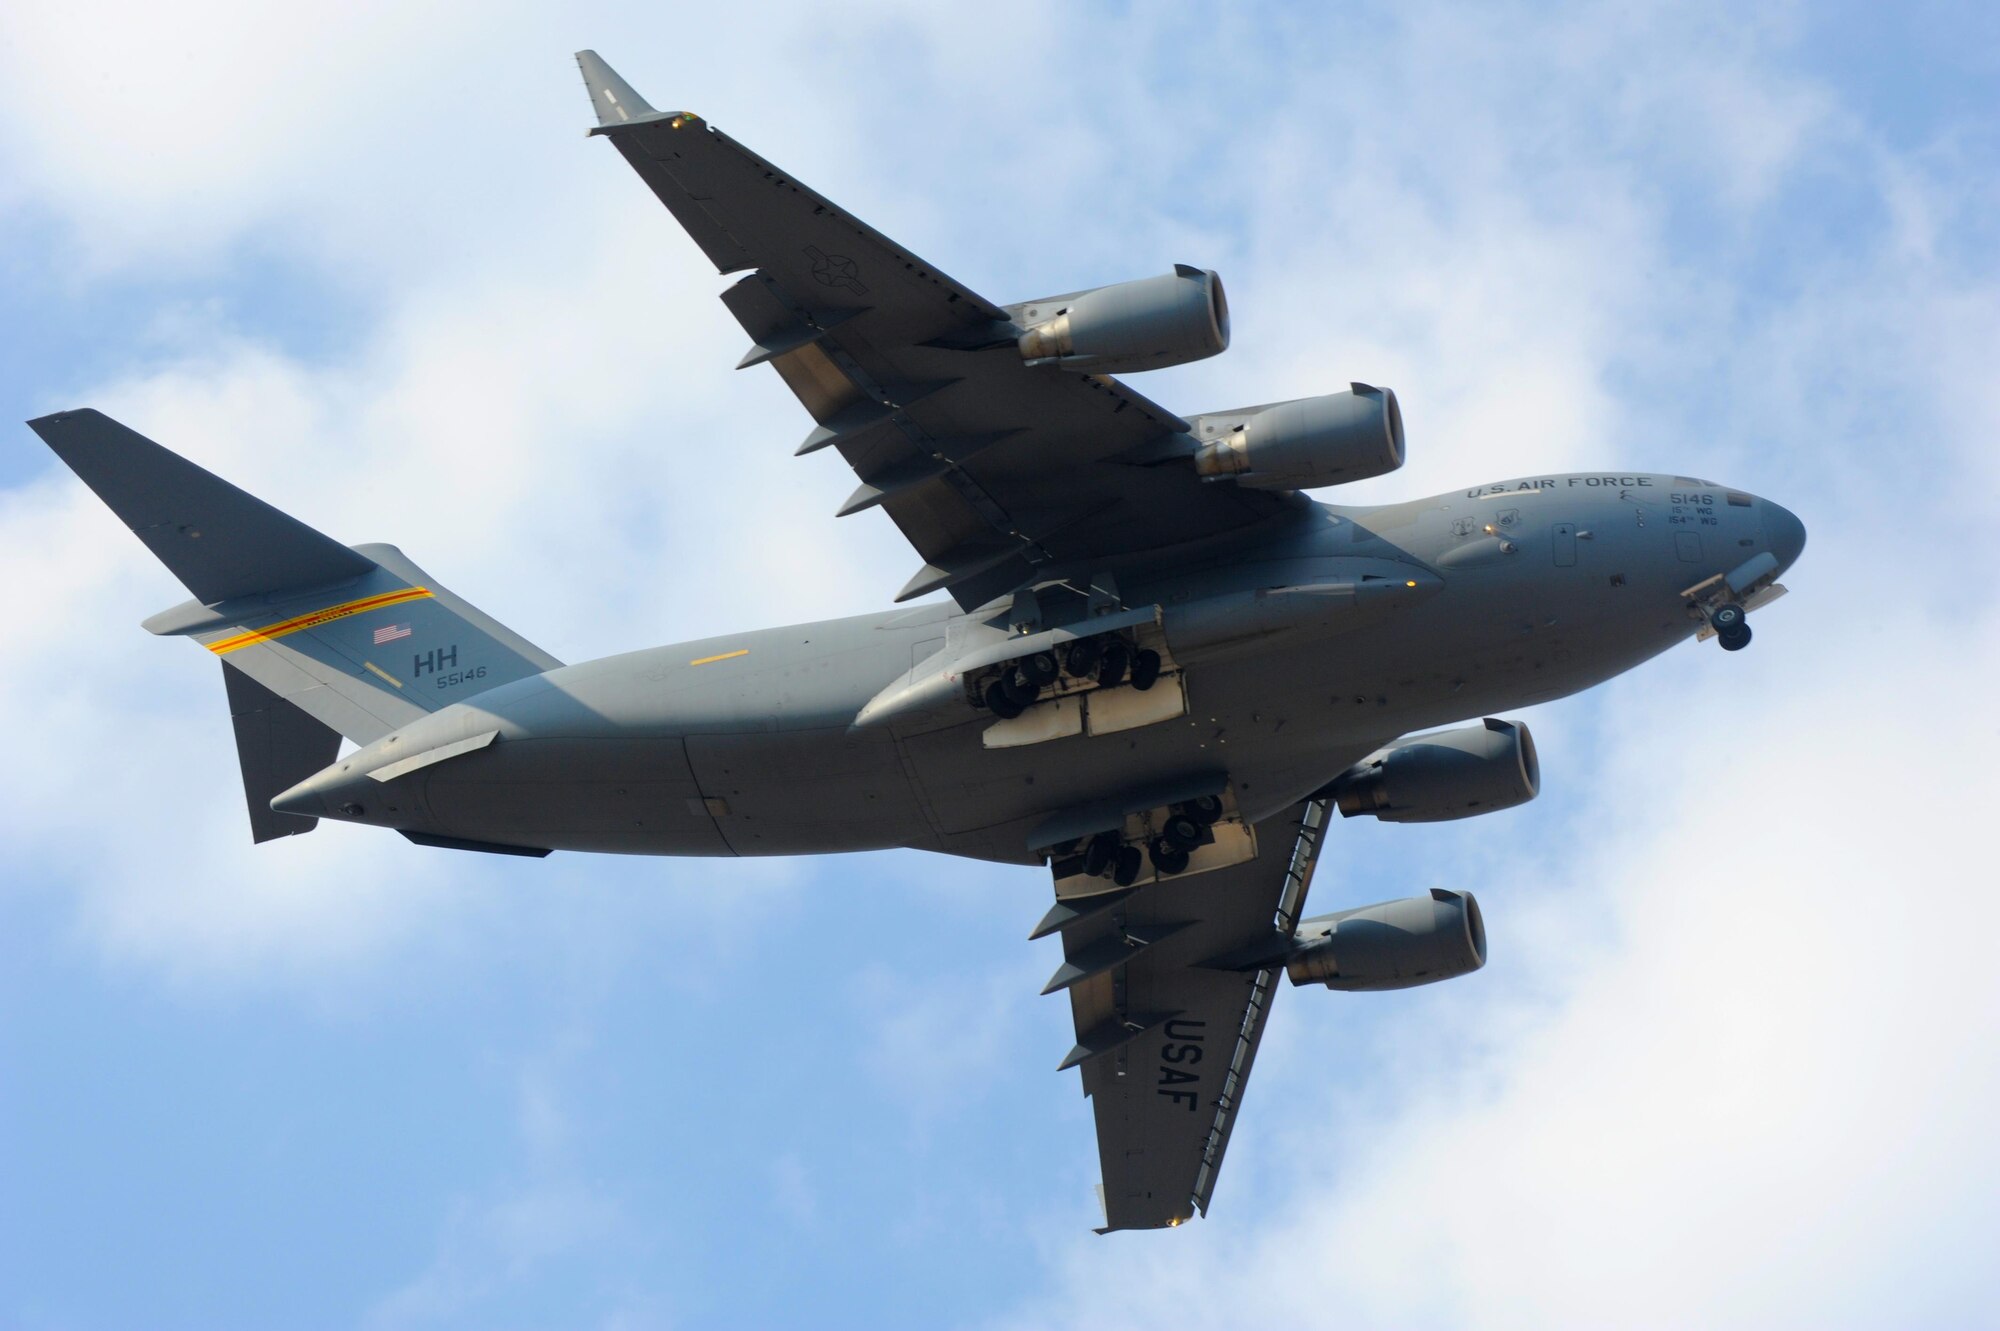 A Pacific Air Forces C-17 Globemaster III displays its landing gear as part of an aerial demonstration during Aero India 15 Feb. 21, 2015, at Air Force Station Yelahanka, in Bangaluru, India. Aero India is India's premier aerospace exhibition and airshow and allowed the U.S. to demonstrate its commitment to the security of the Indo-Asia-Pacific region and showcase defense aircraft and equipment, which ultimately contributes toward better regional cooperation and tactical compatibility with other countries. This year marks the 10th iteration of Aero India since its inception in 1996. (U.S. Air Force photo/1st Lt Andrea Dykes)